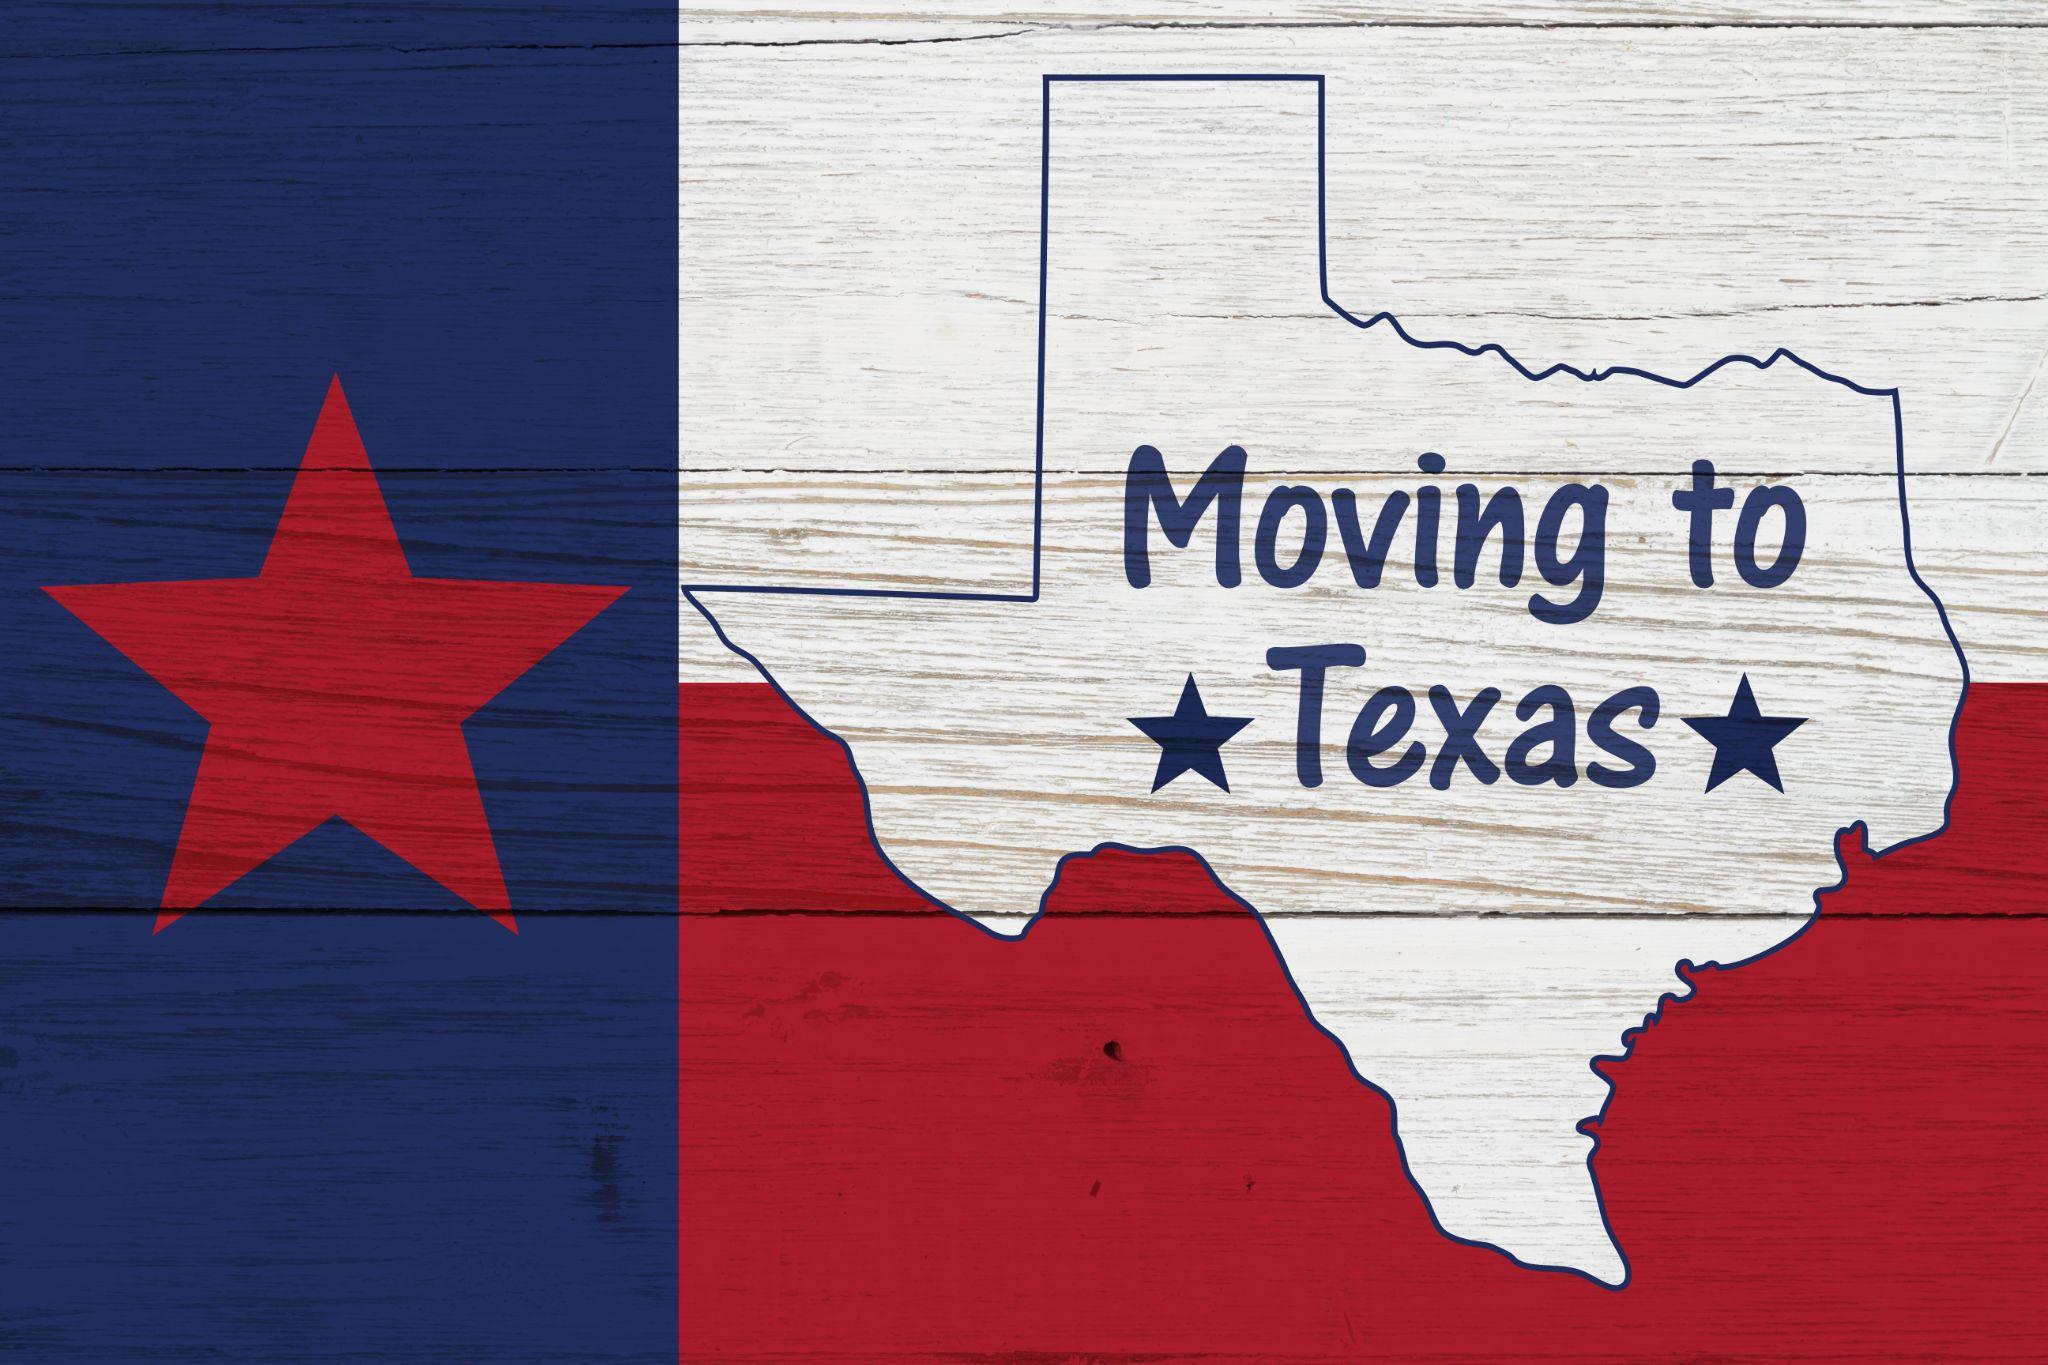 Moving to Texas message on a Texas state flag with the state map